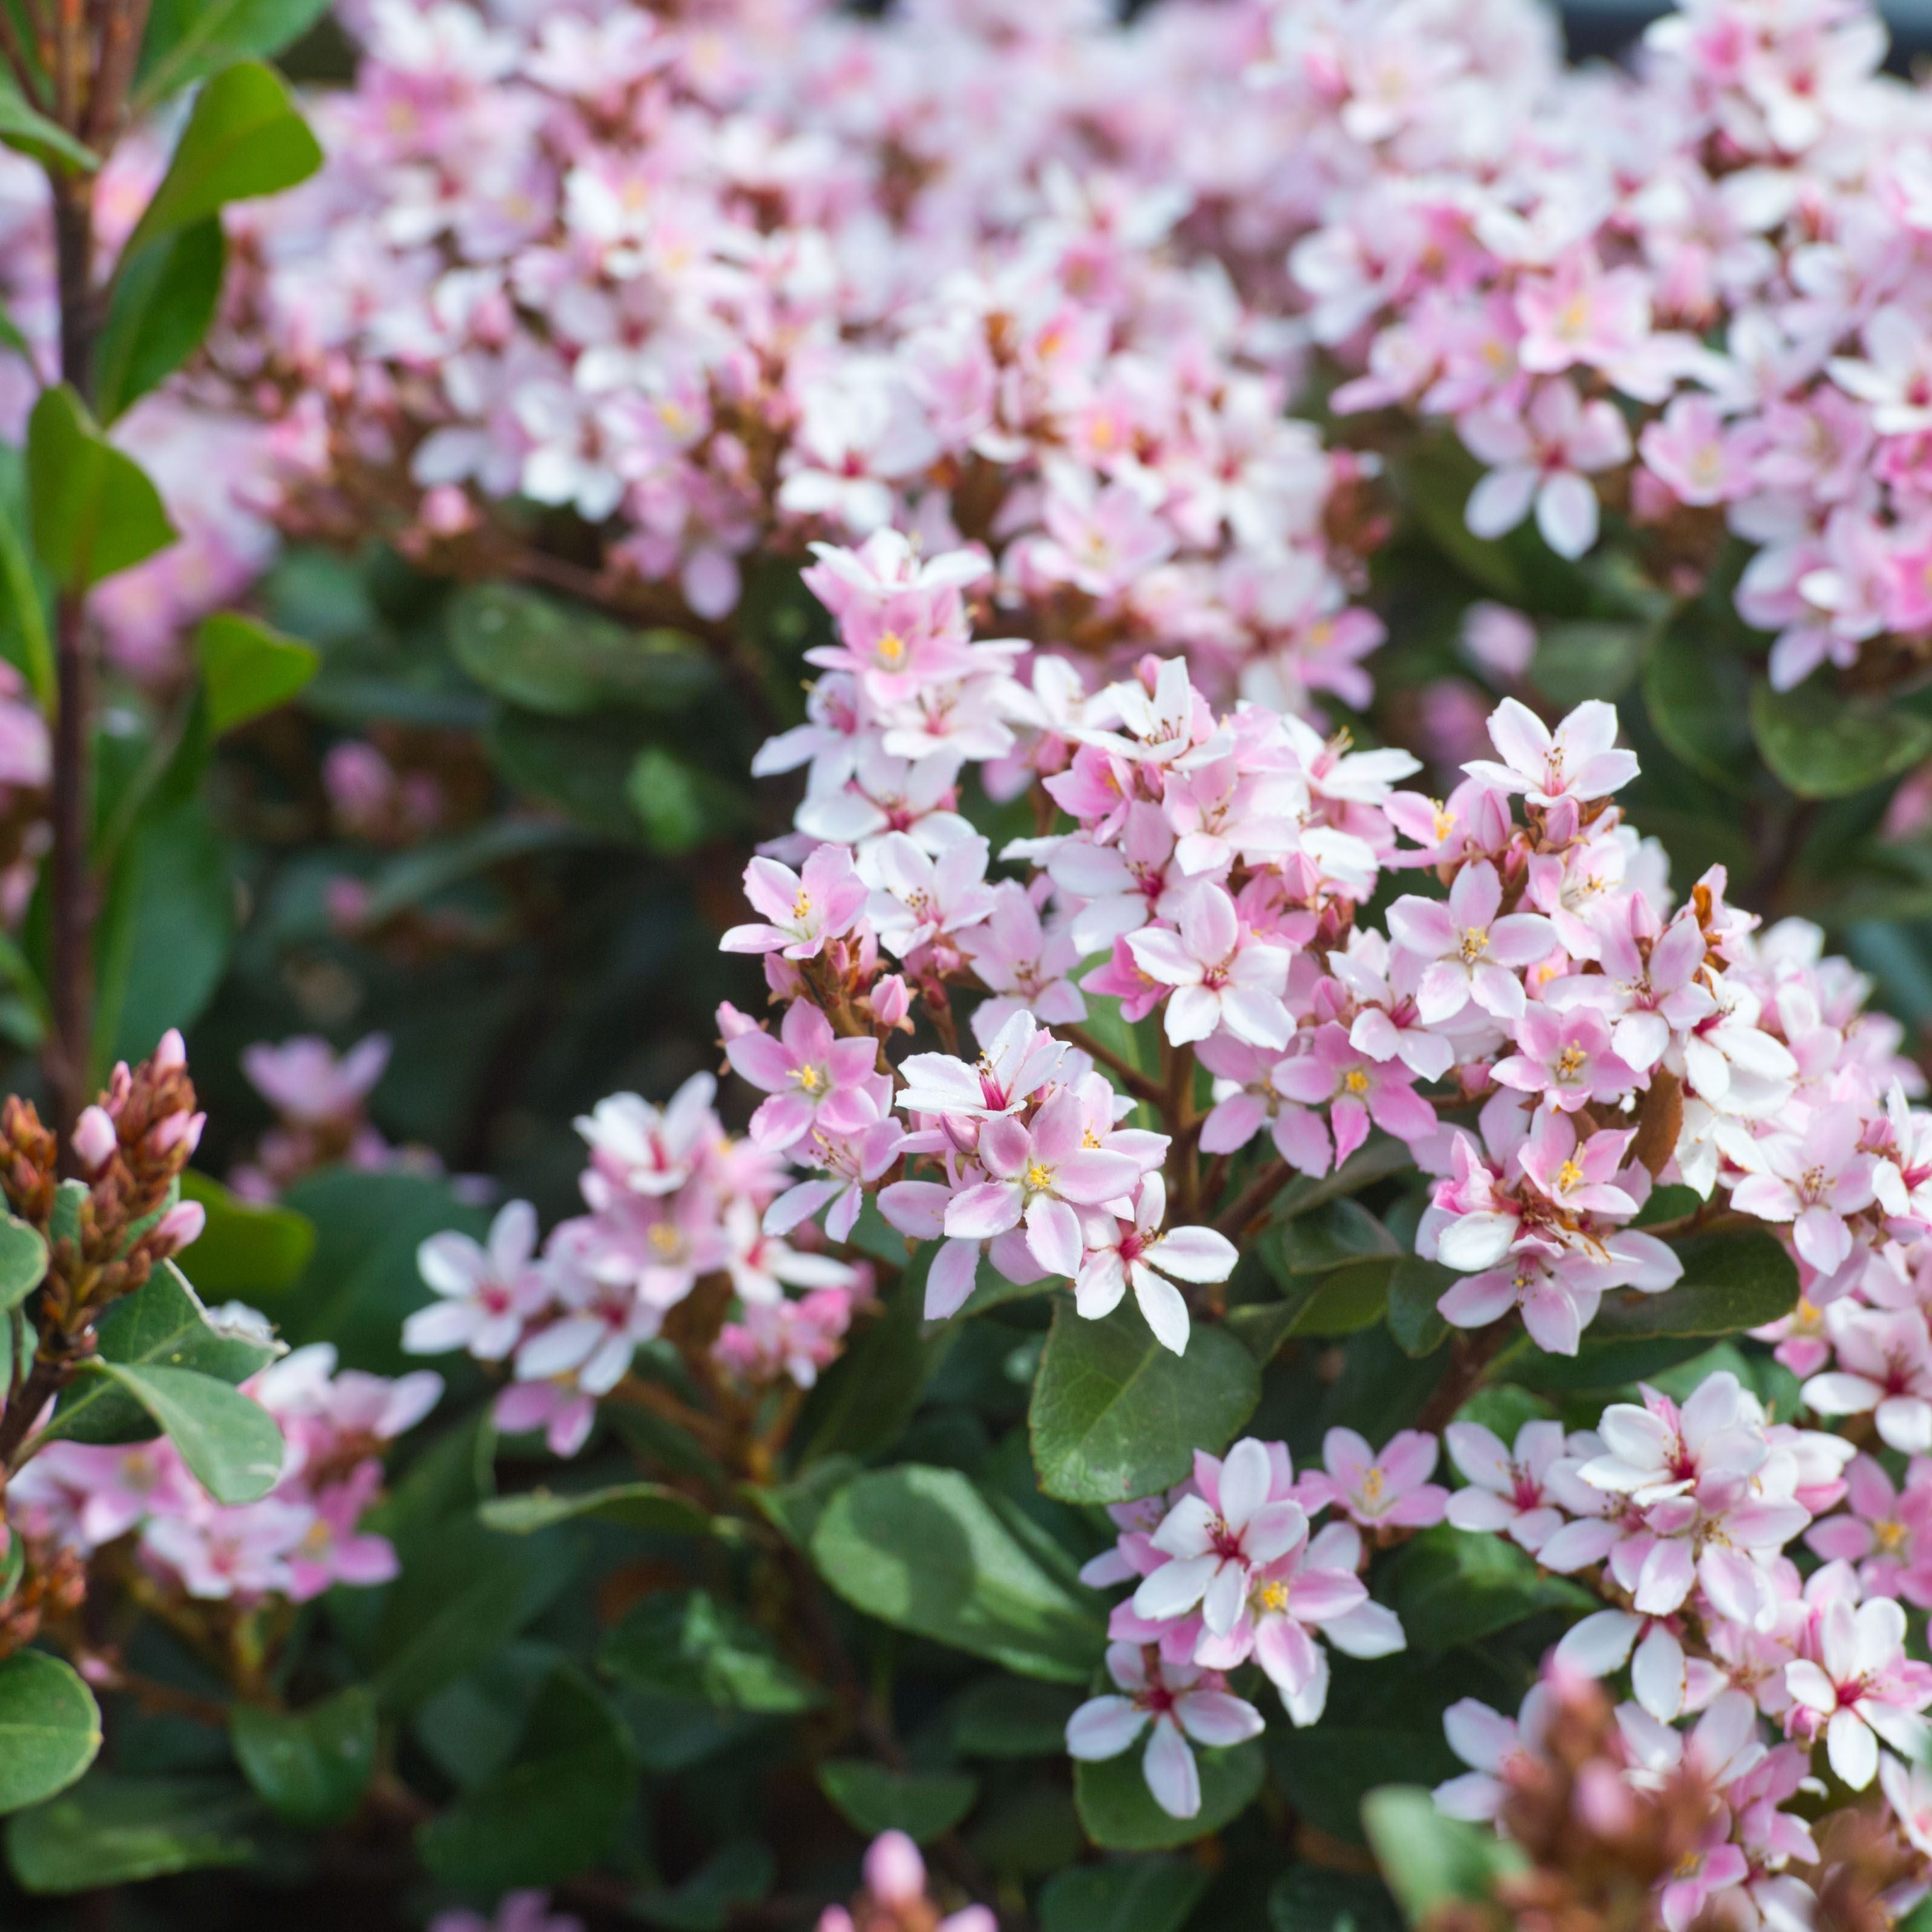 Indian Hawthorn, Attractive, Compact, Shrub with Pale Pink Blooms Changing To White.